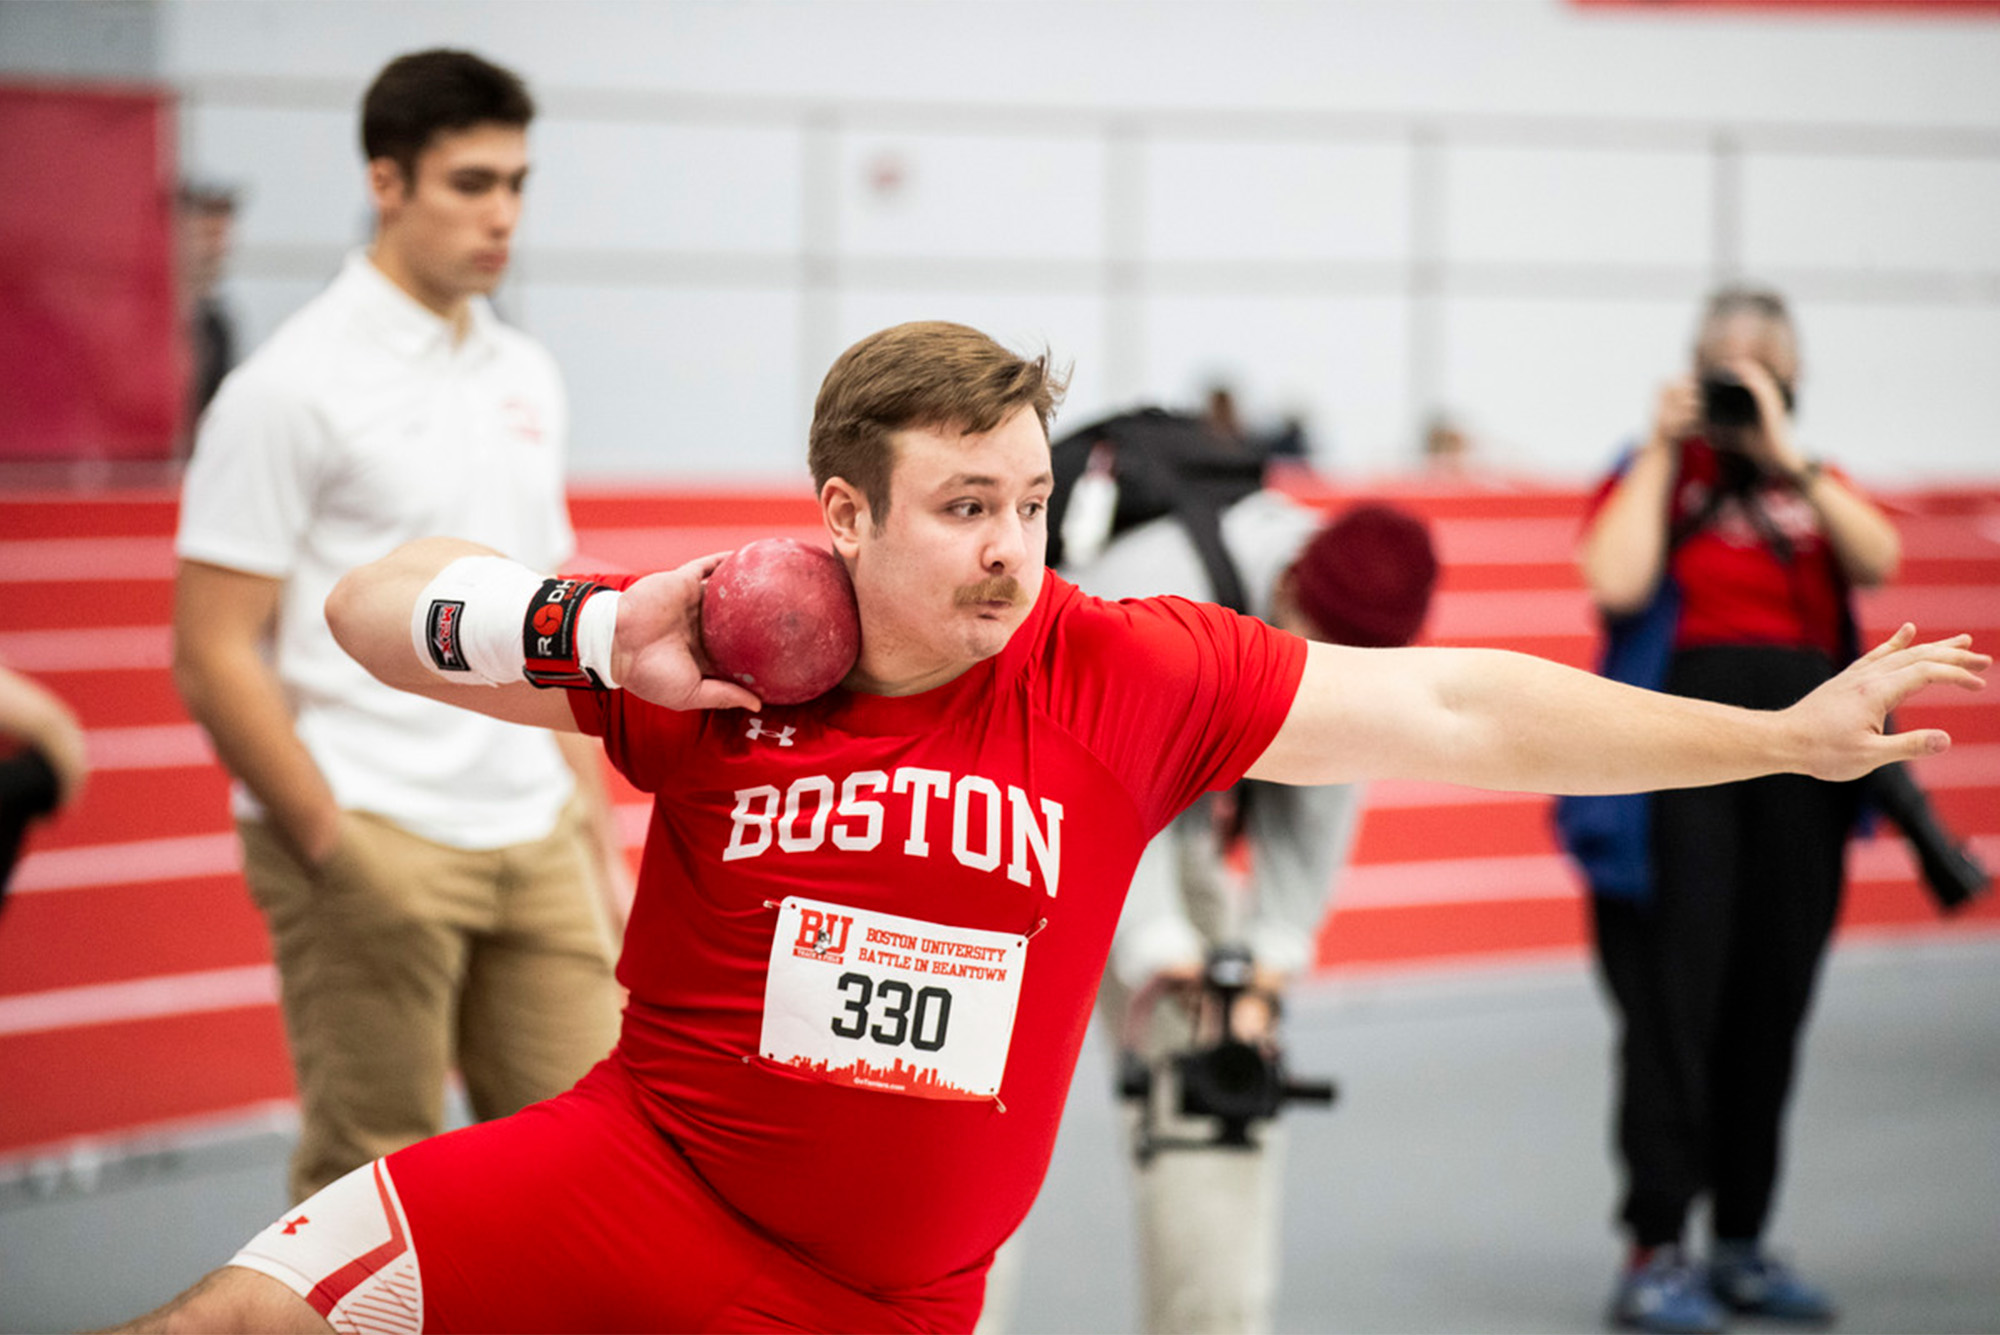 Photo: A college athlete wearing a red jersey throws a shotput at a track and field meet